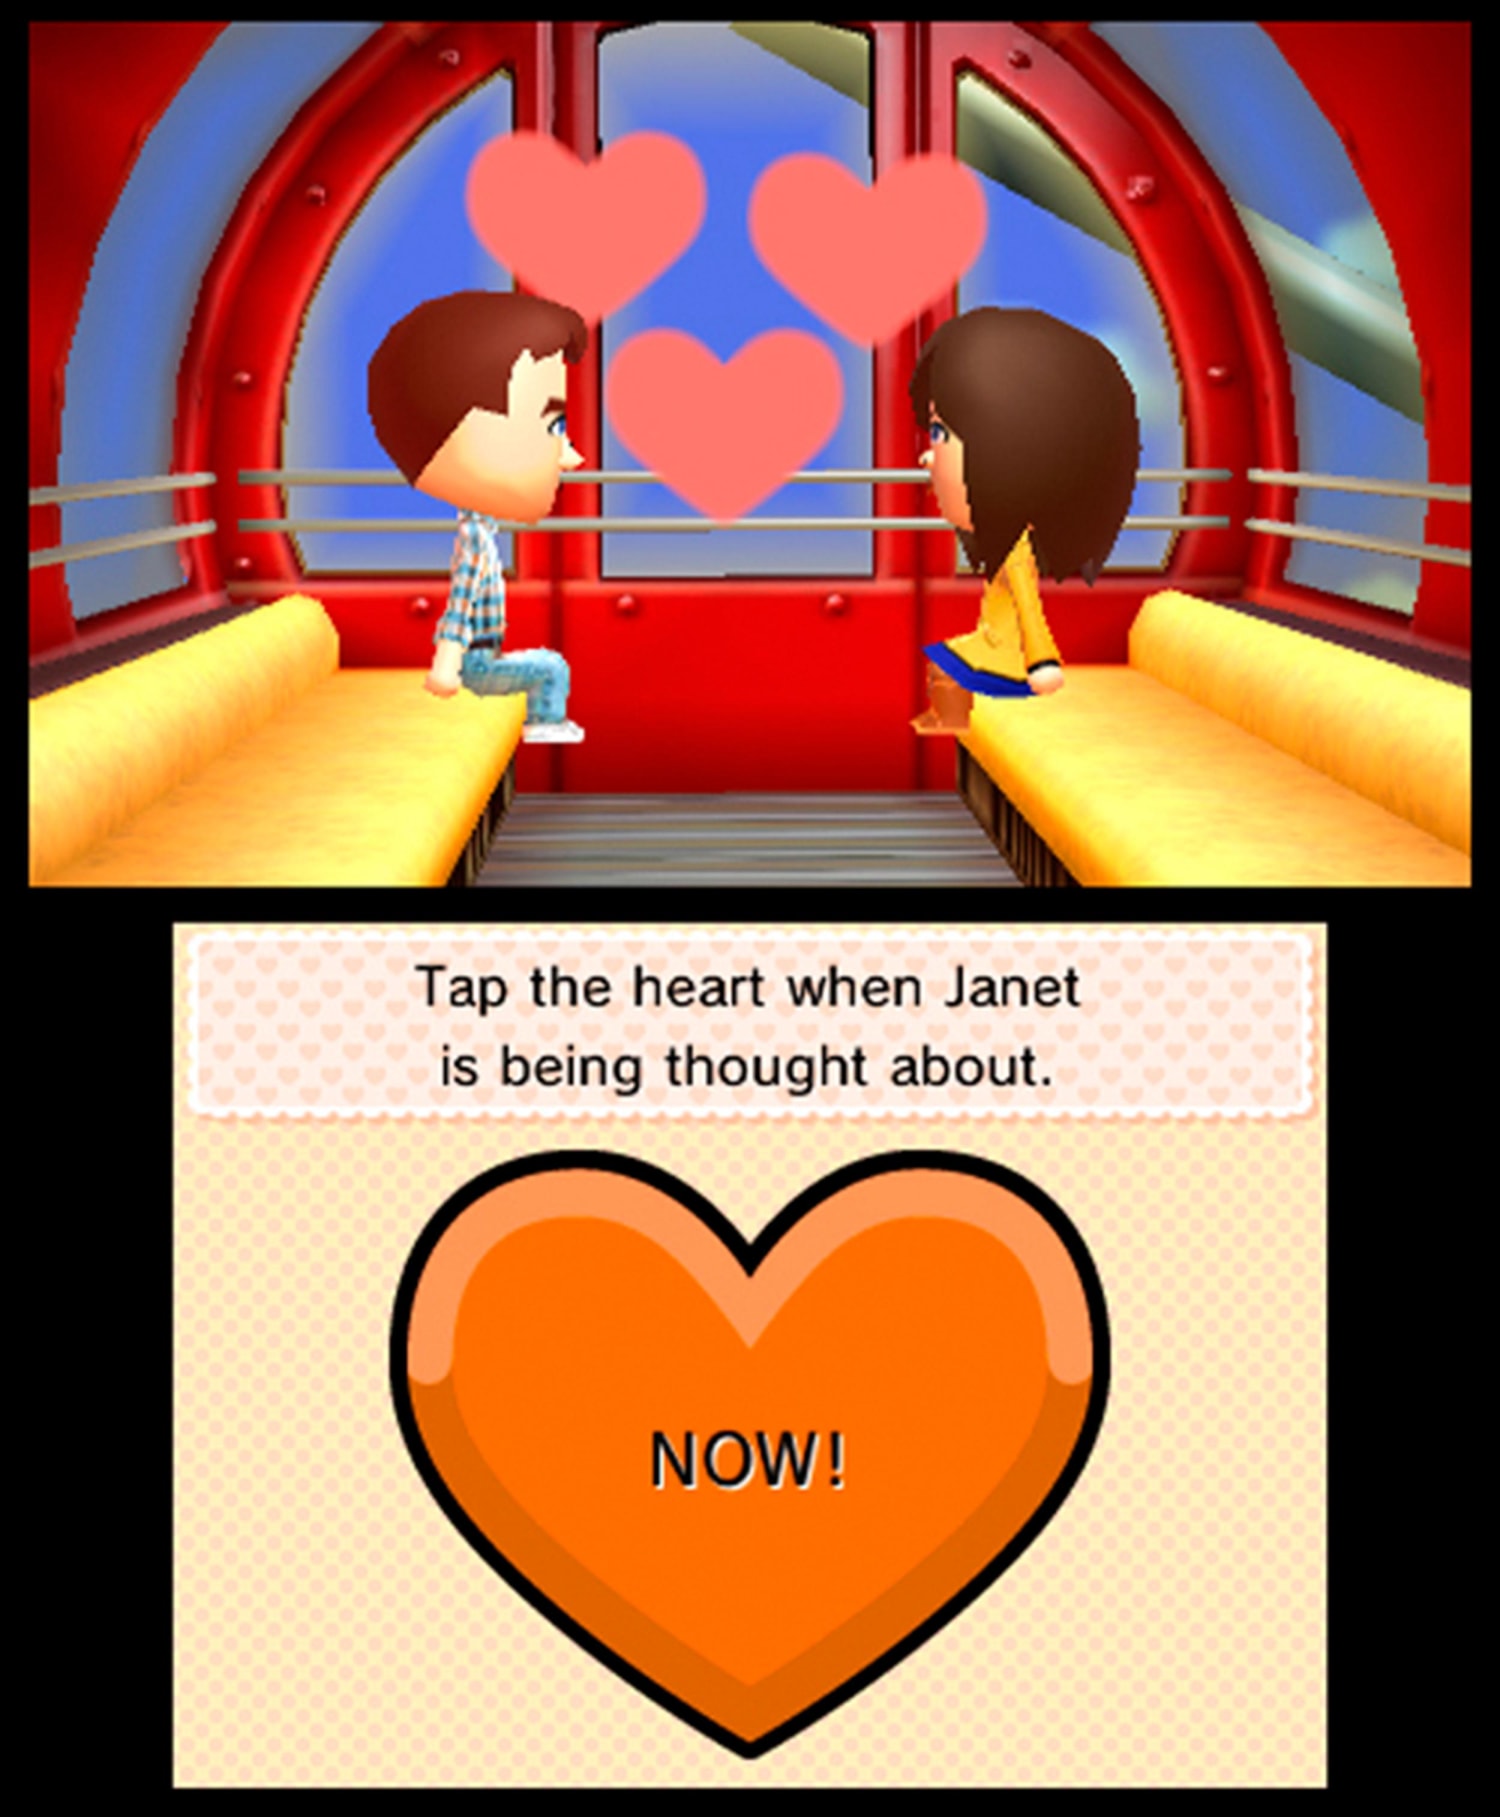 Nintendo Apologizes For Omitting Gay Marriage From Tomodachi Life